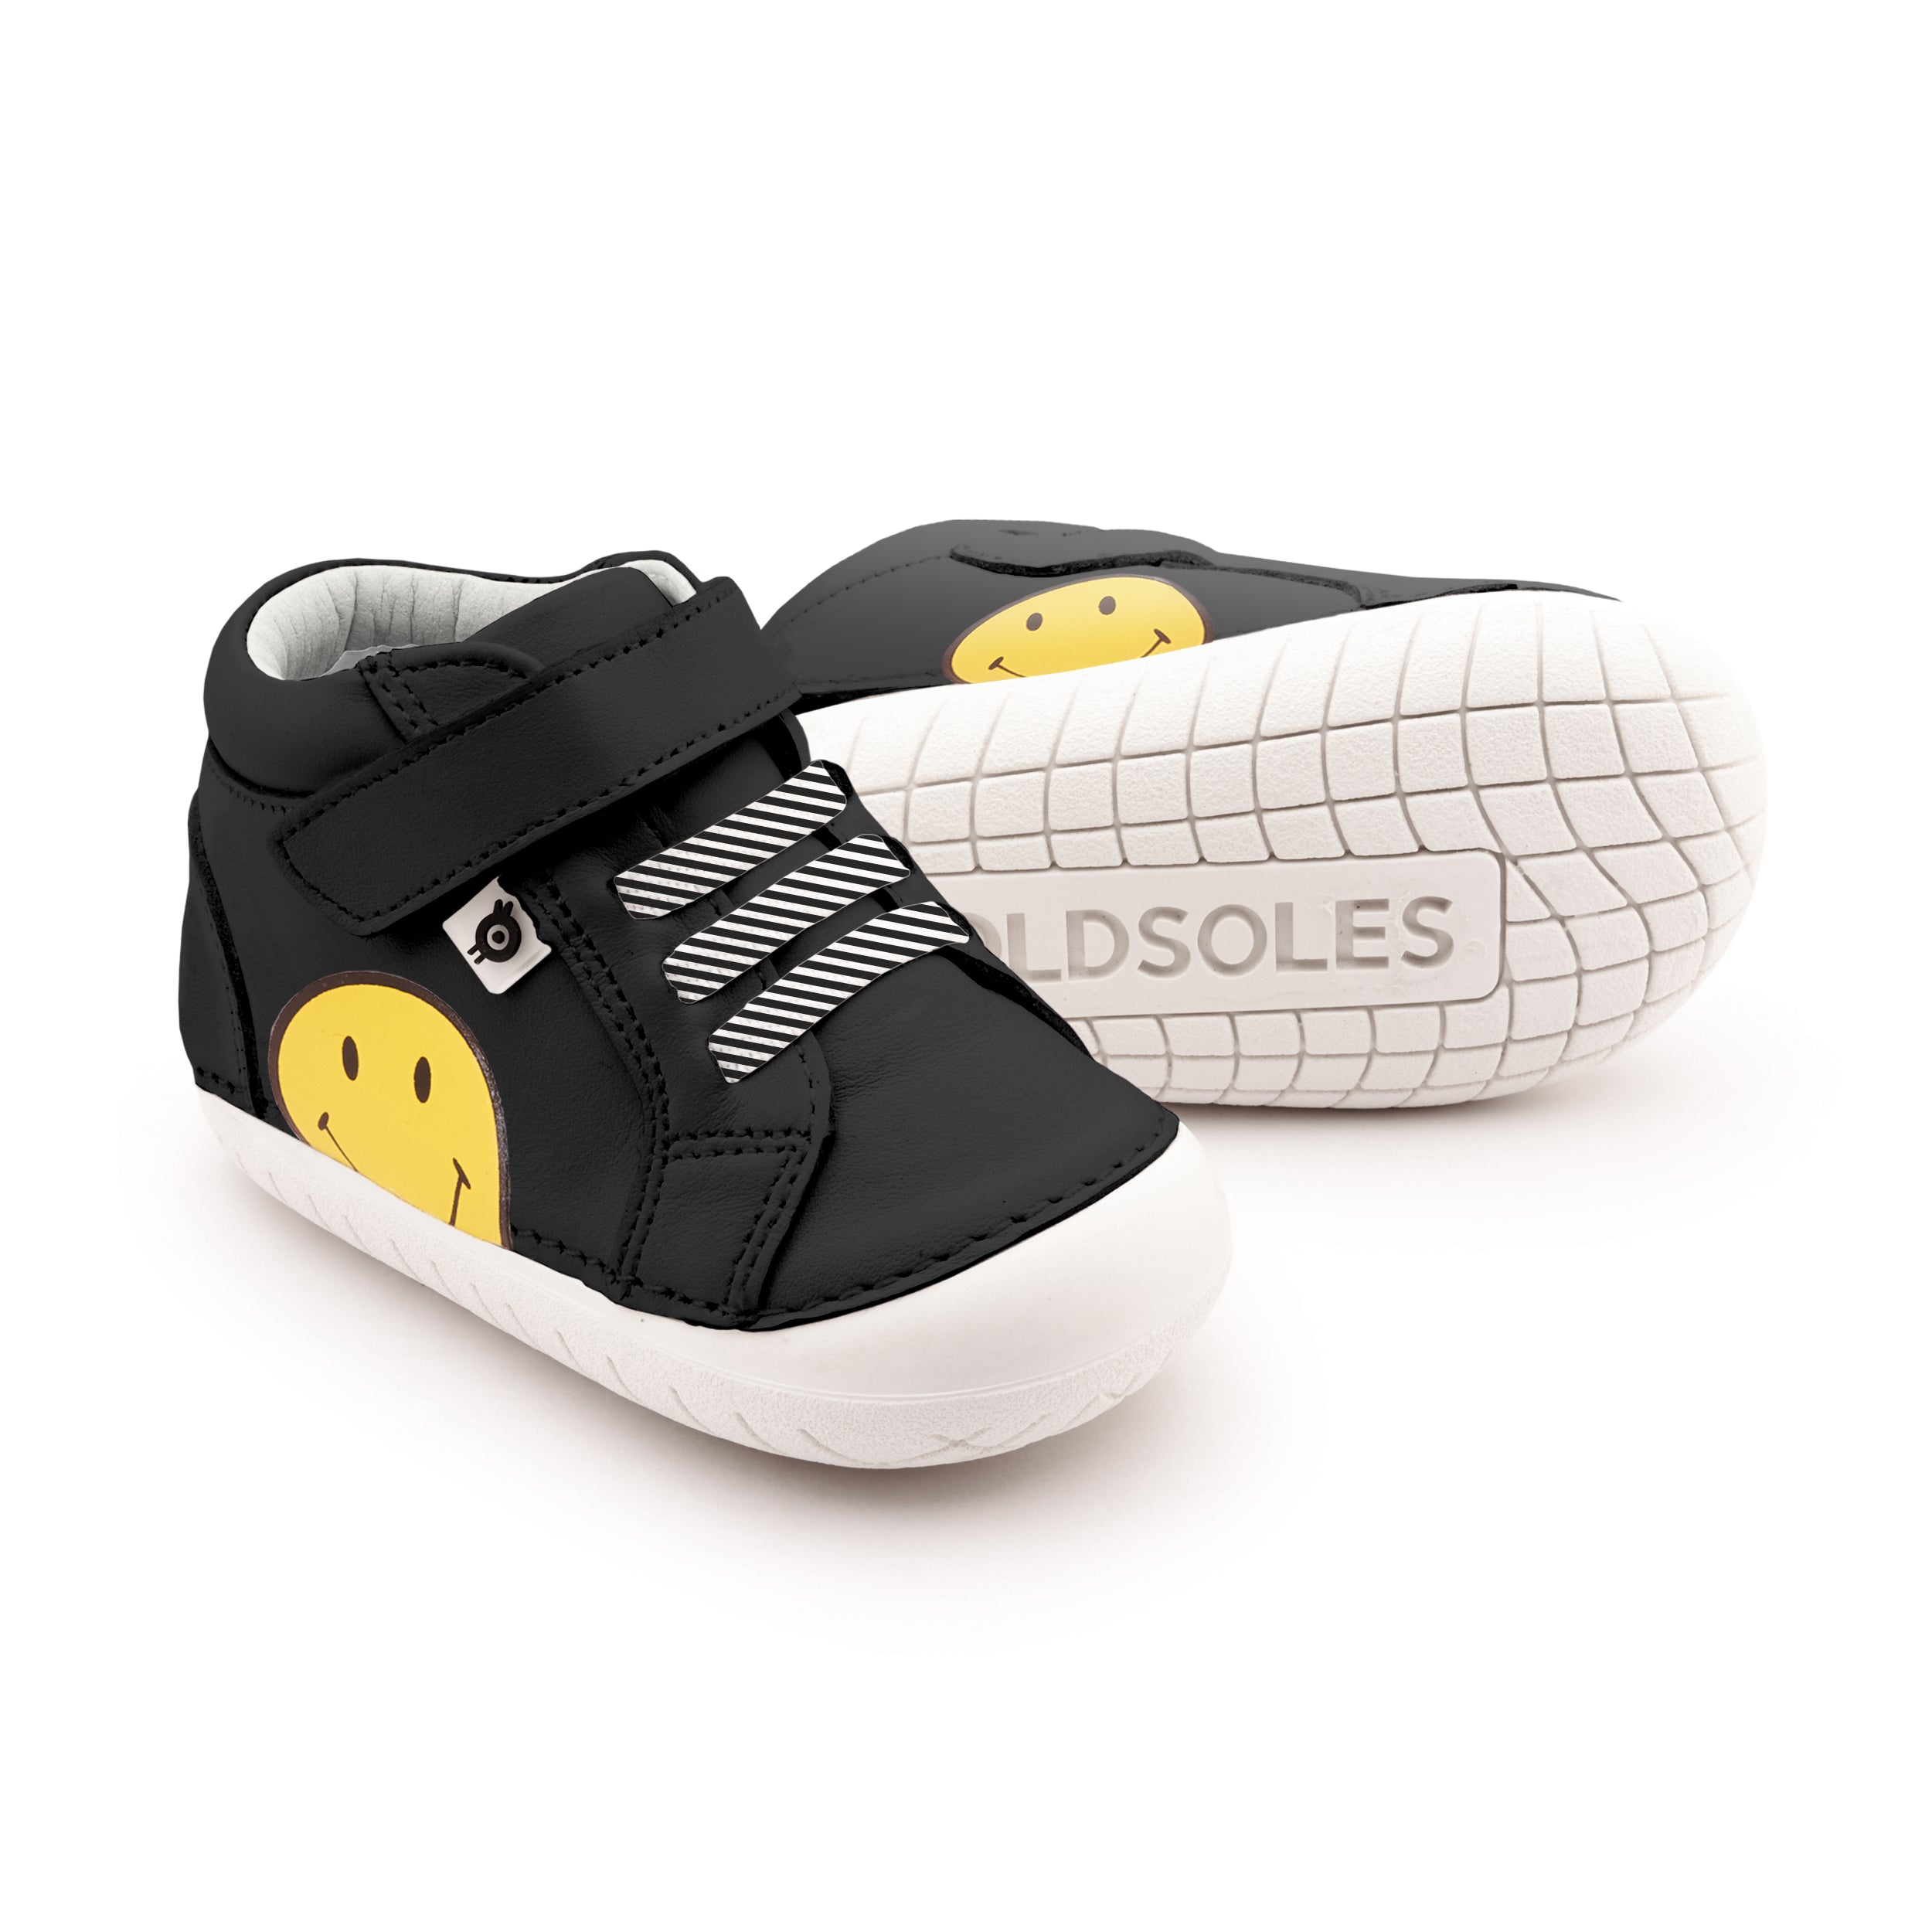 Old Soles Smiley Pave (Toddler)